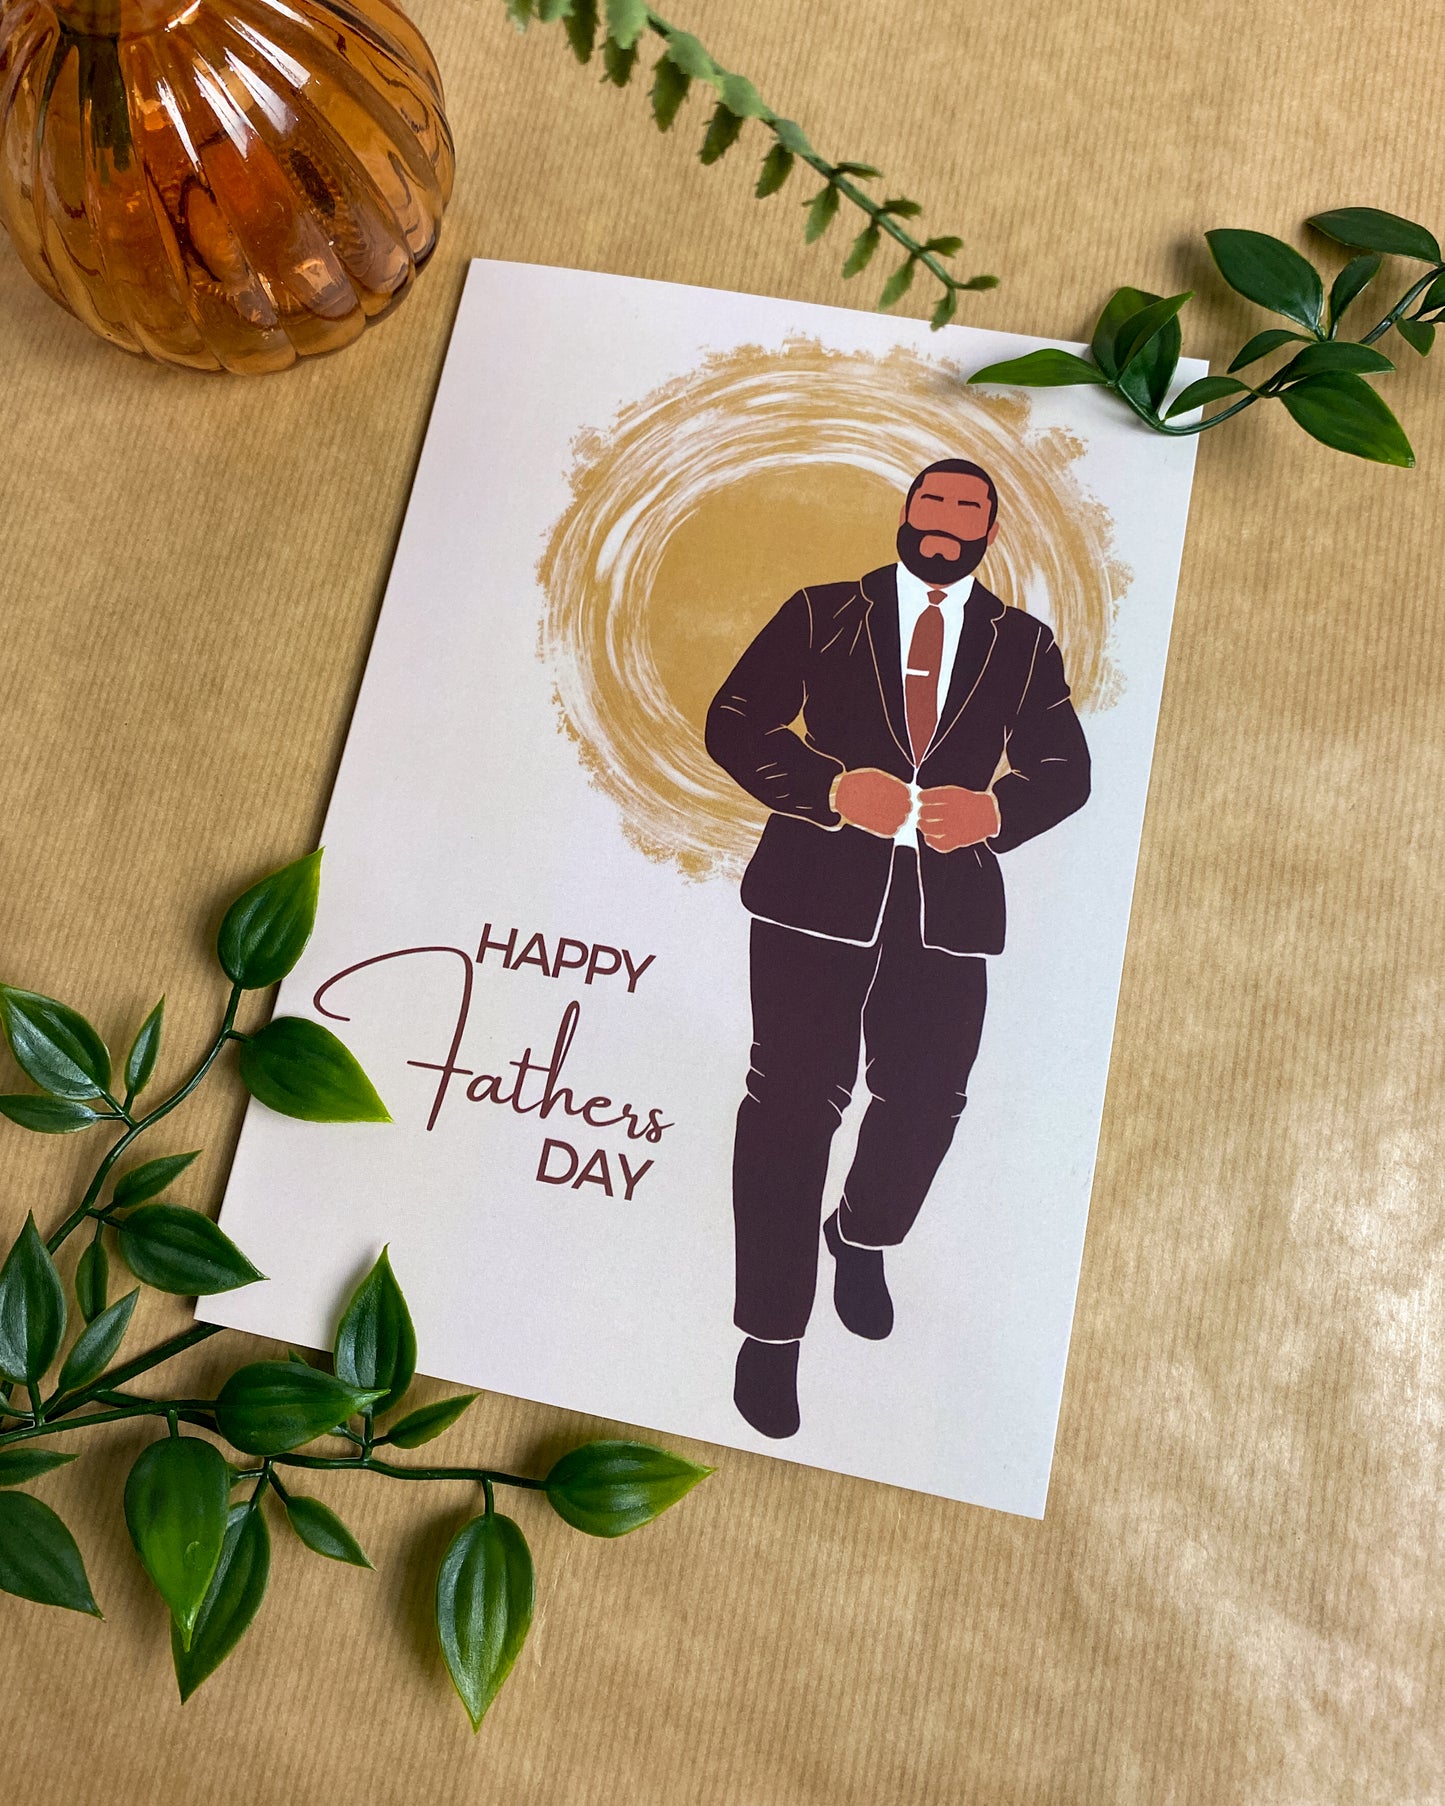 Happy Fathers Day Suited & Booted Card.